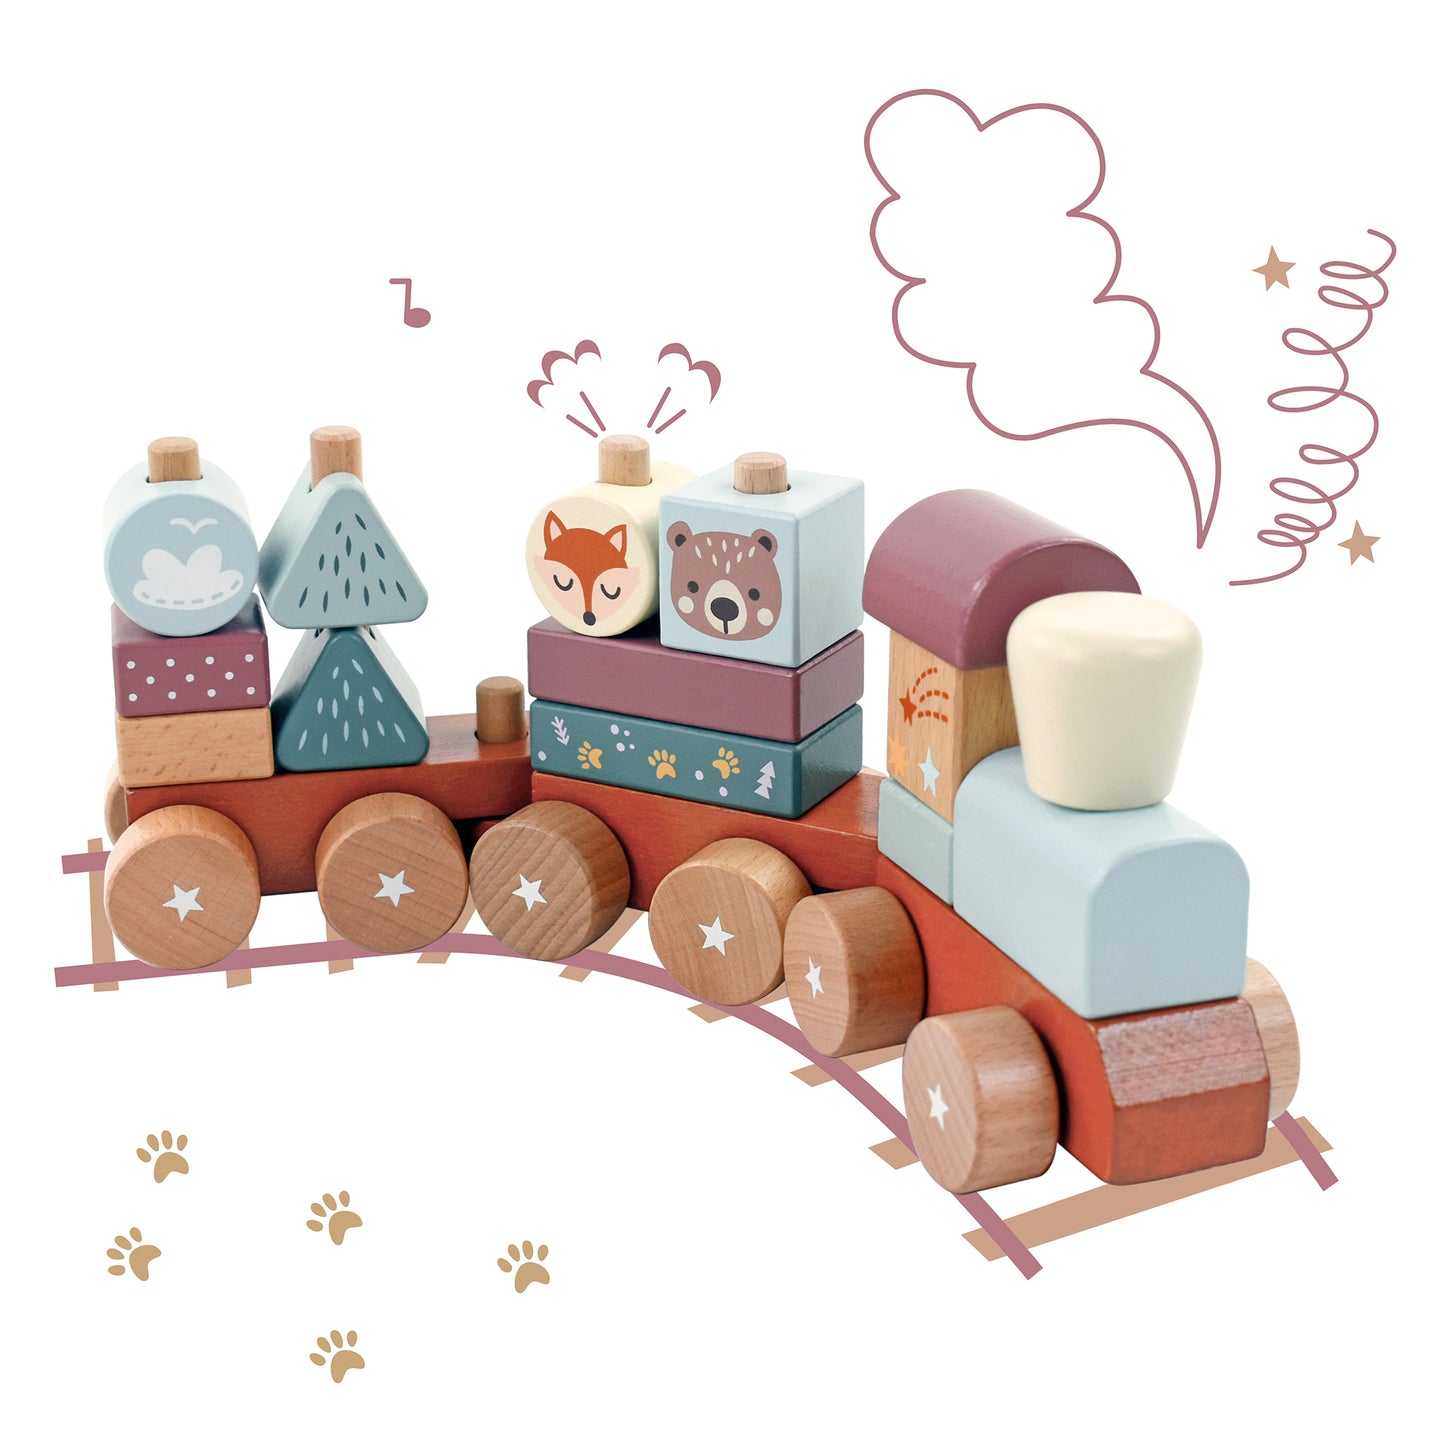 Wooden Toy Stacking Train with Building Blocks